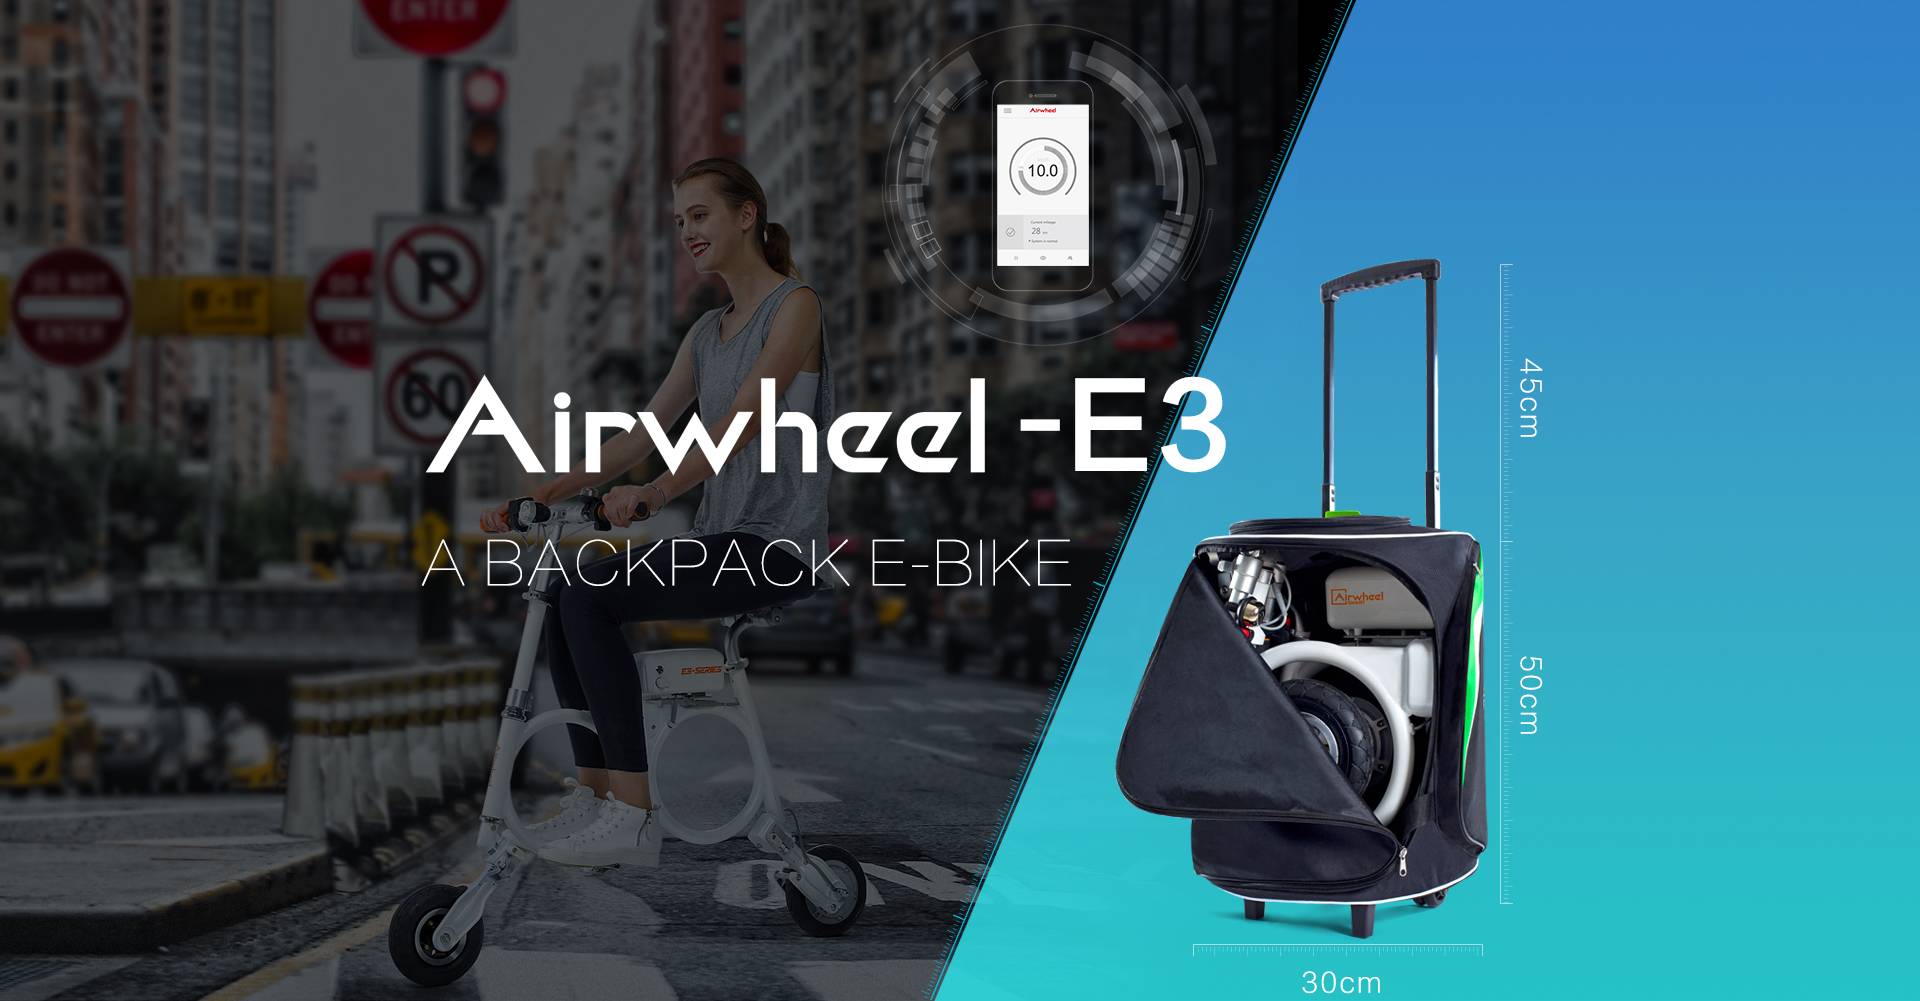 Airwheel E3 electric bicycle in backpack